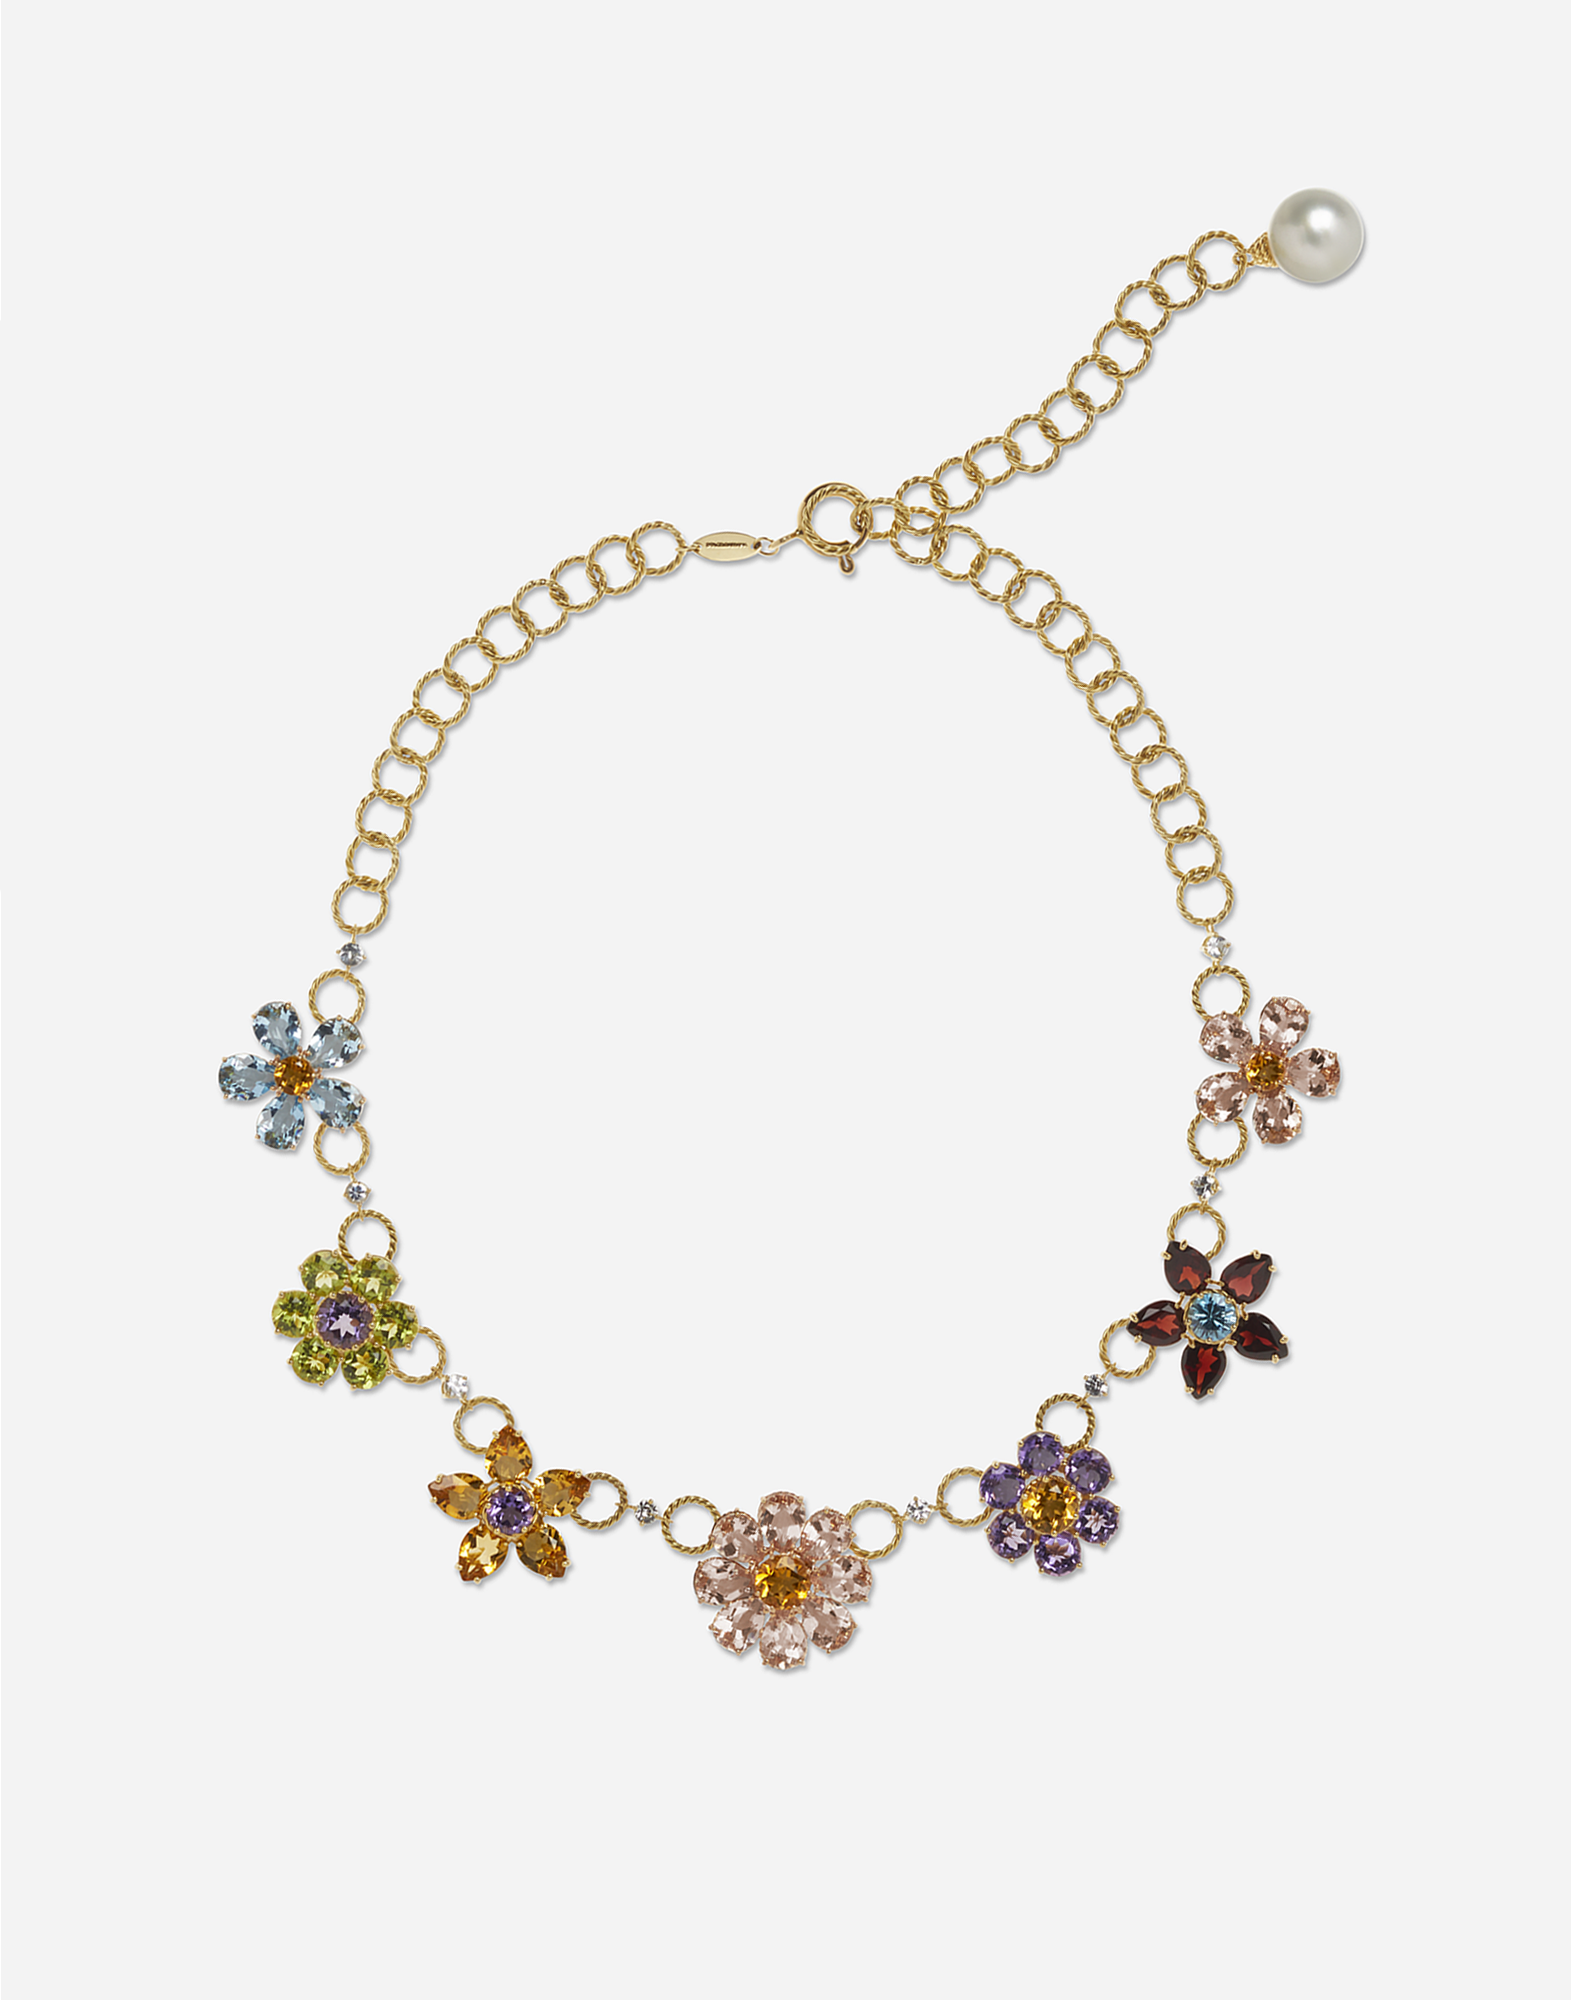 Dolce & Gabbana Necklace With Floral Decorative Elements Gold Female Onesize